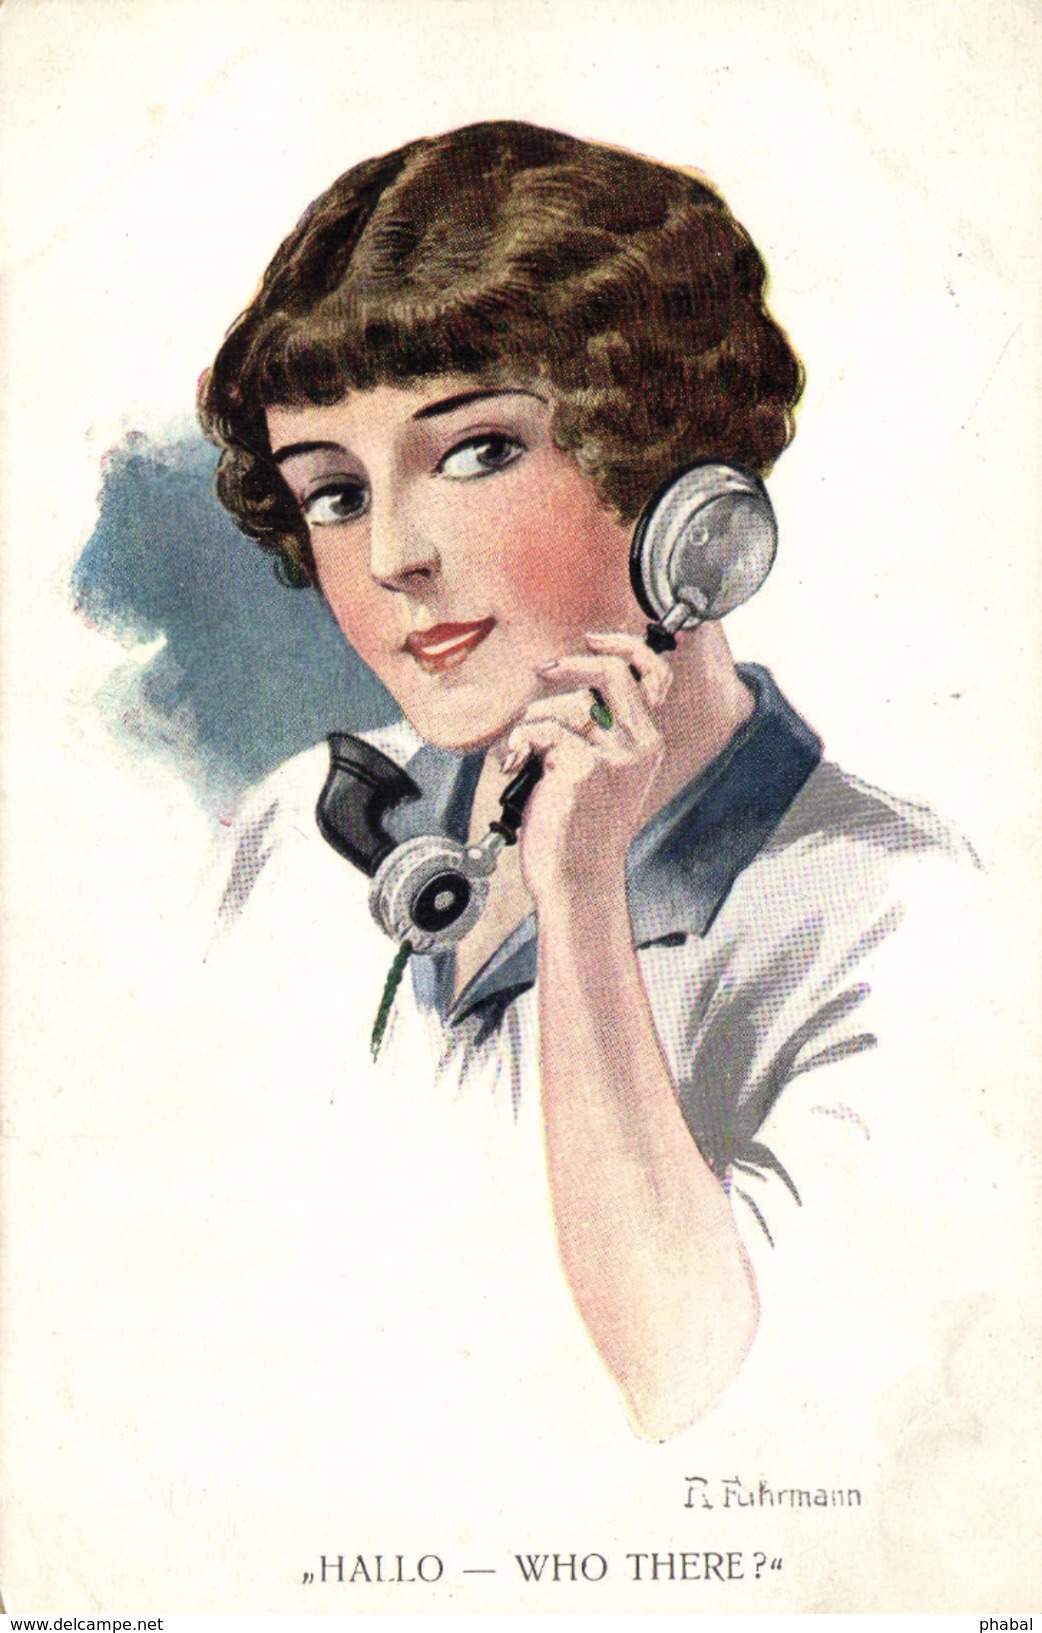 Fuhrmann, Pretty Lady With A Telephone, Hallo, Who There?, Old Postcard - 1900-1949